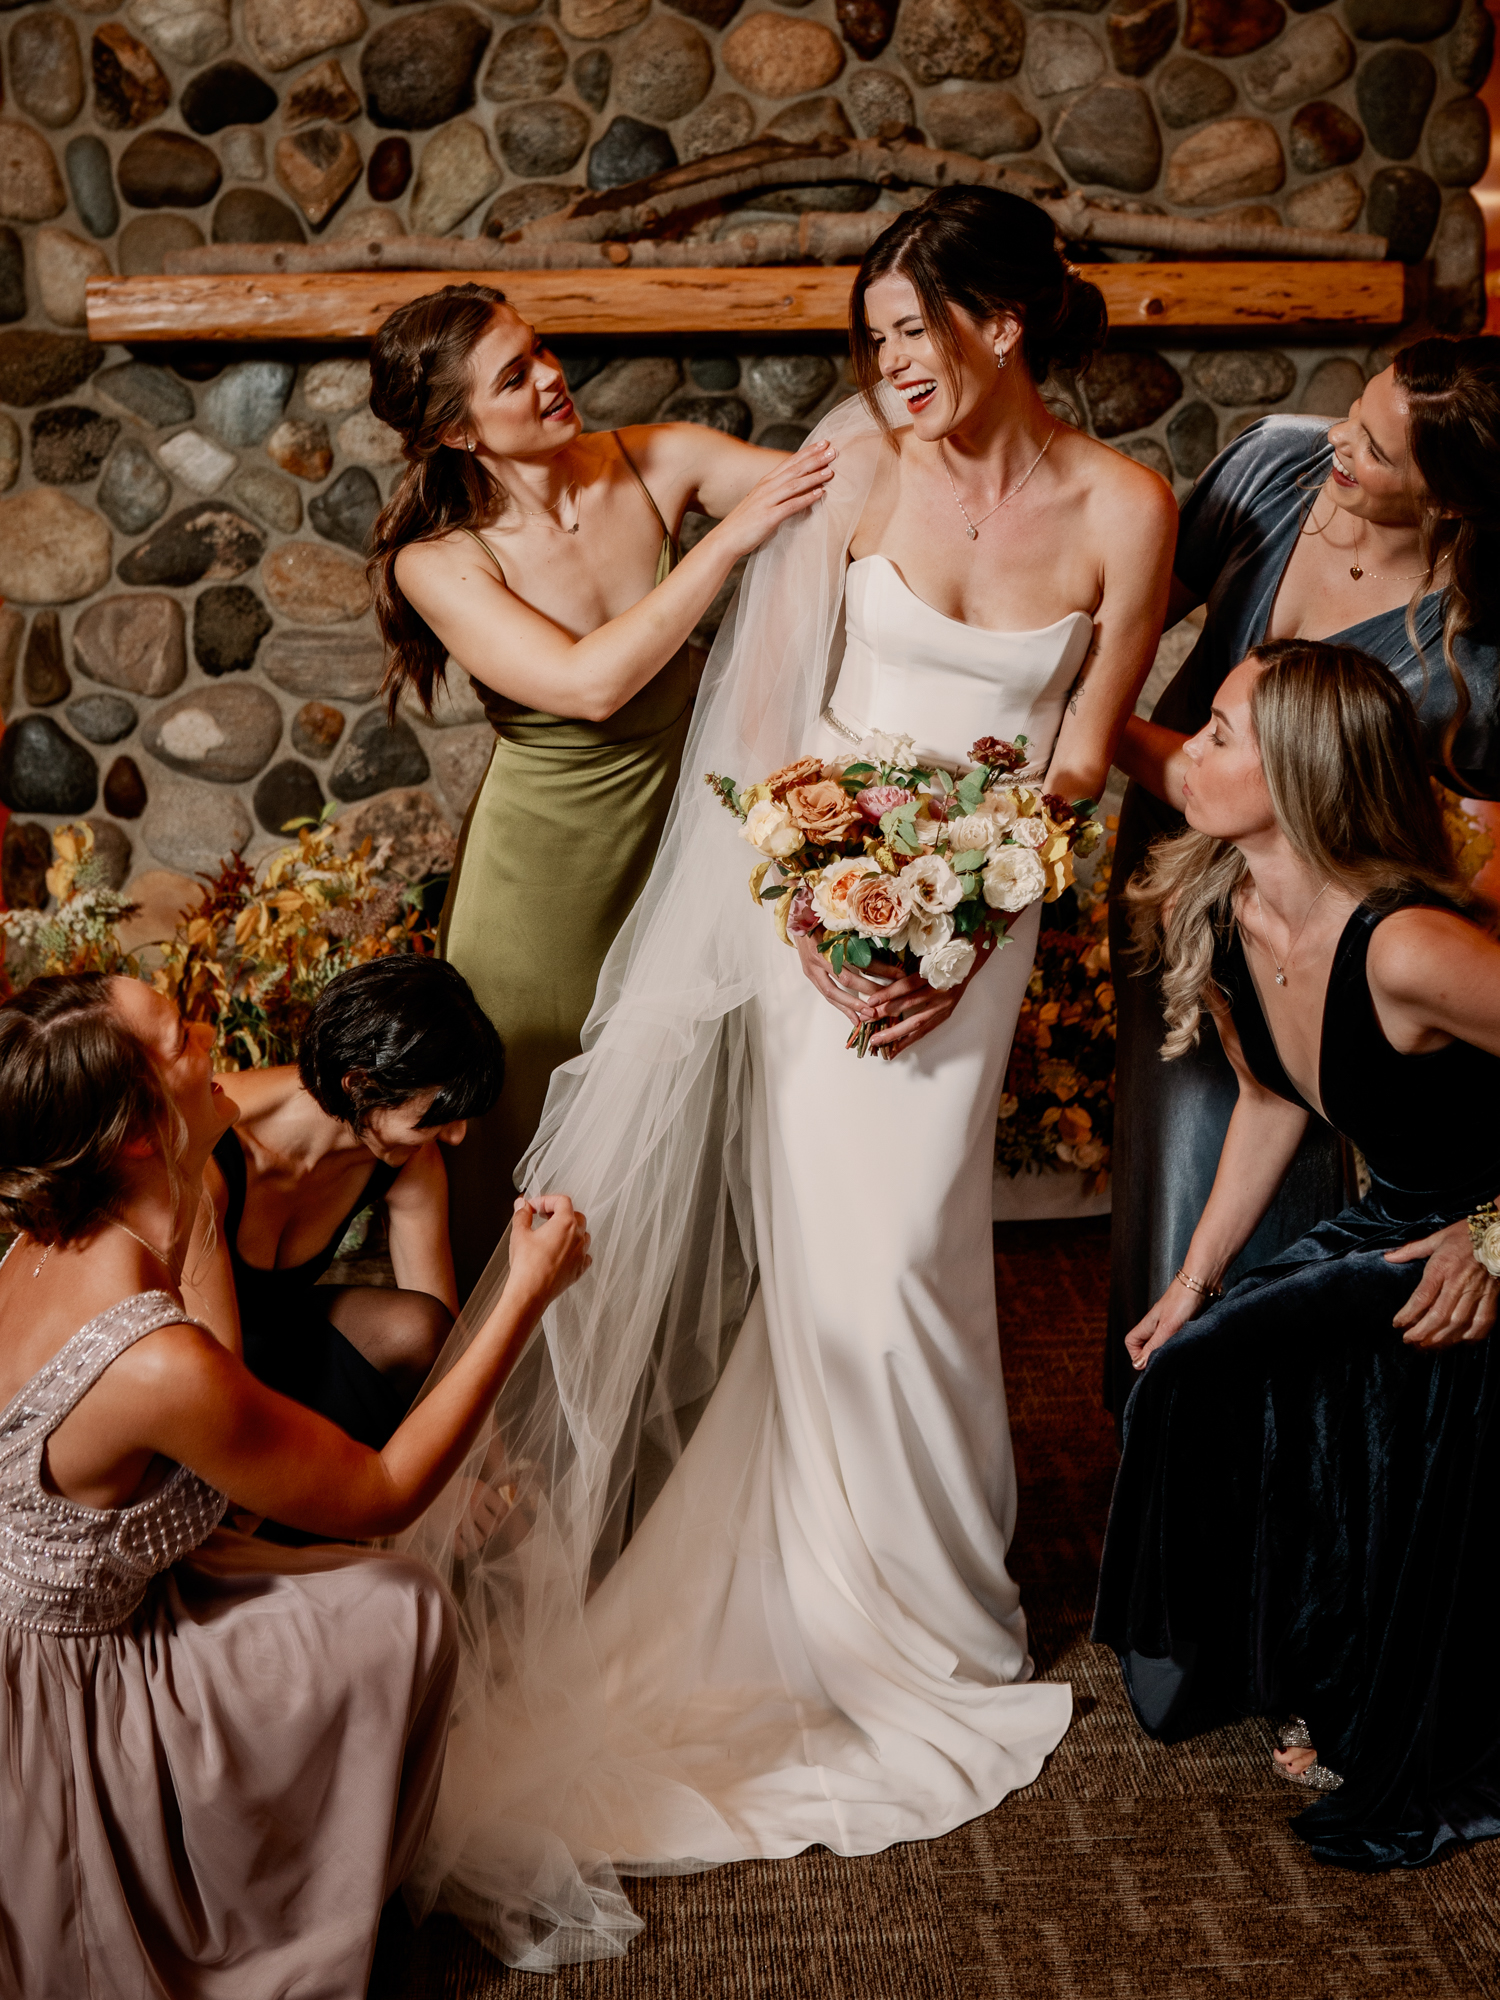 Mountain Springs Lodge weddings: Fletcher and Veronica and her bridesmaids